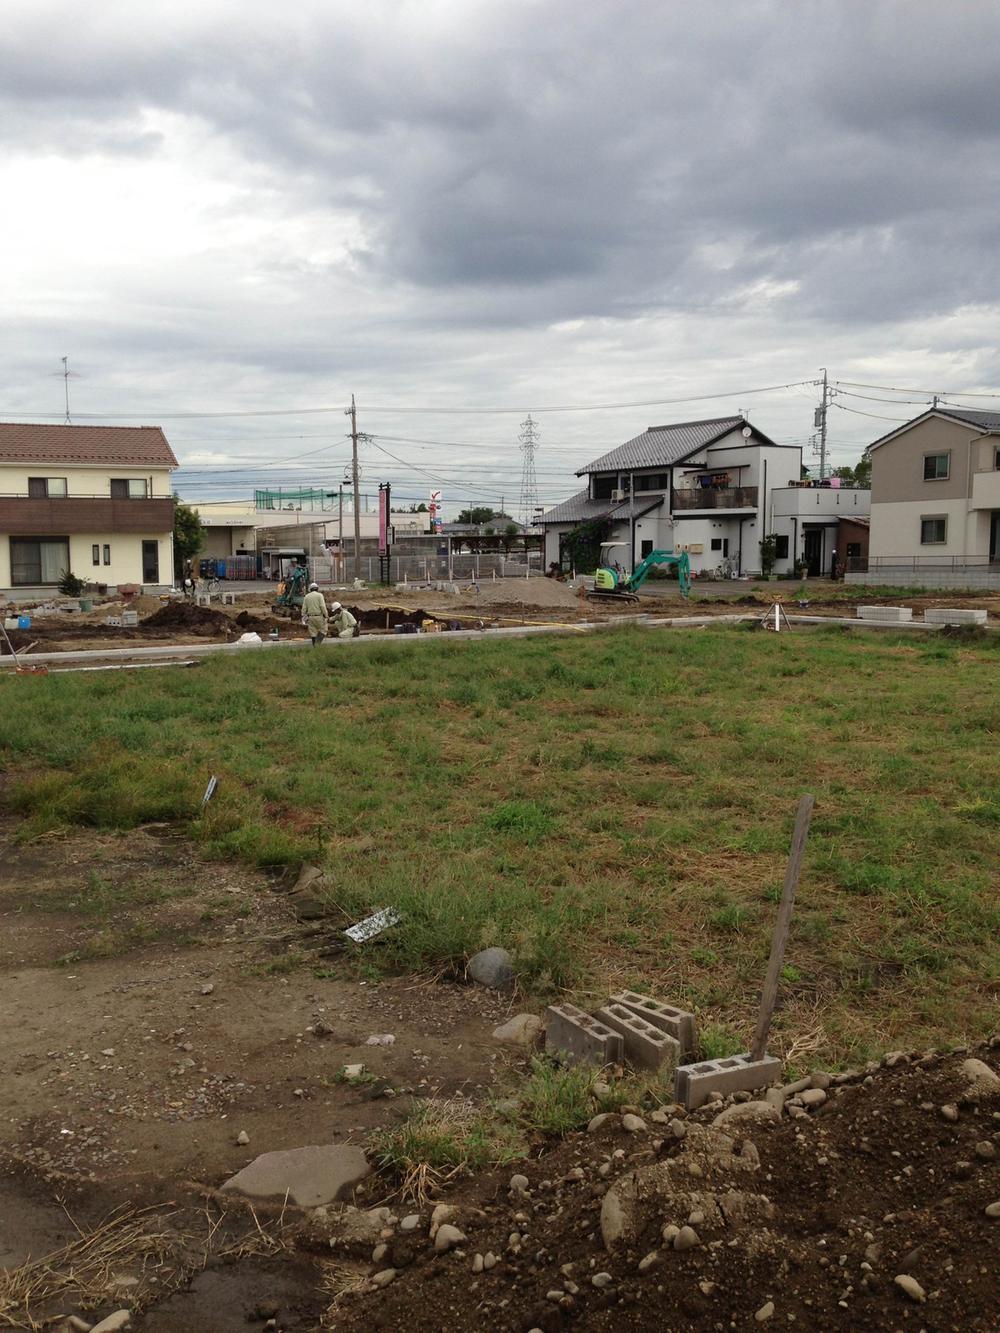 Local land photo. Local (10 May 2013) shooting 181.84 sq m (55.00 square meters) 16.5 million yen